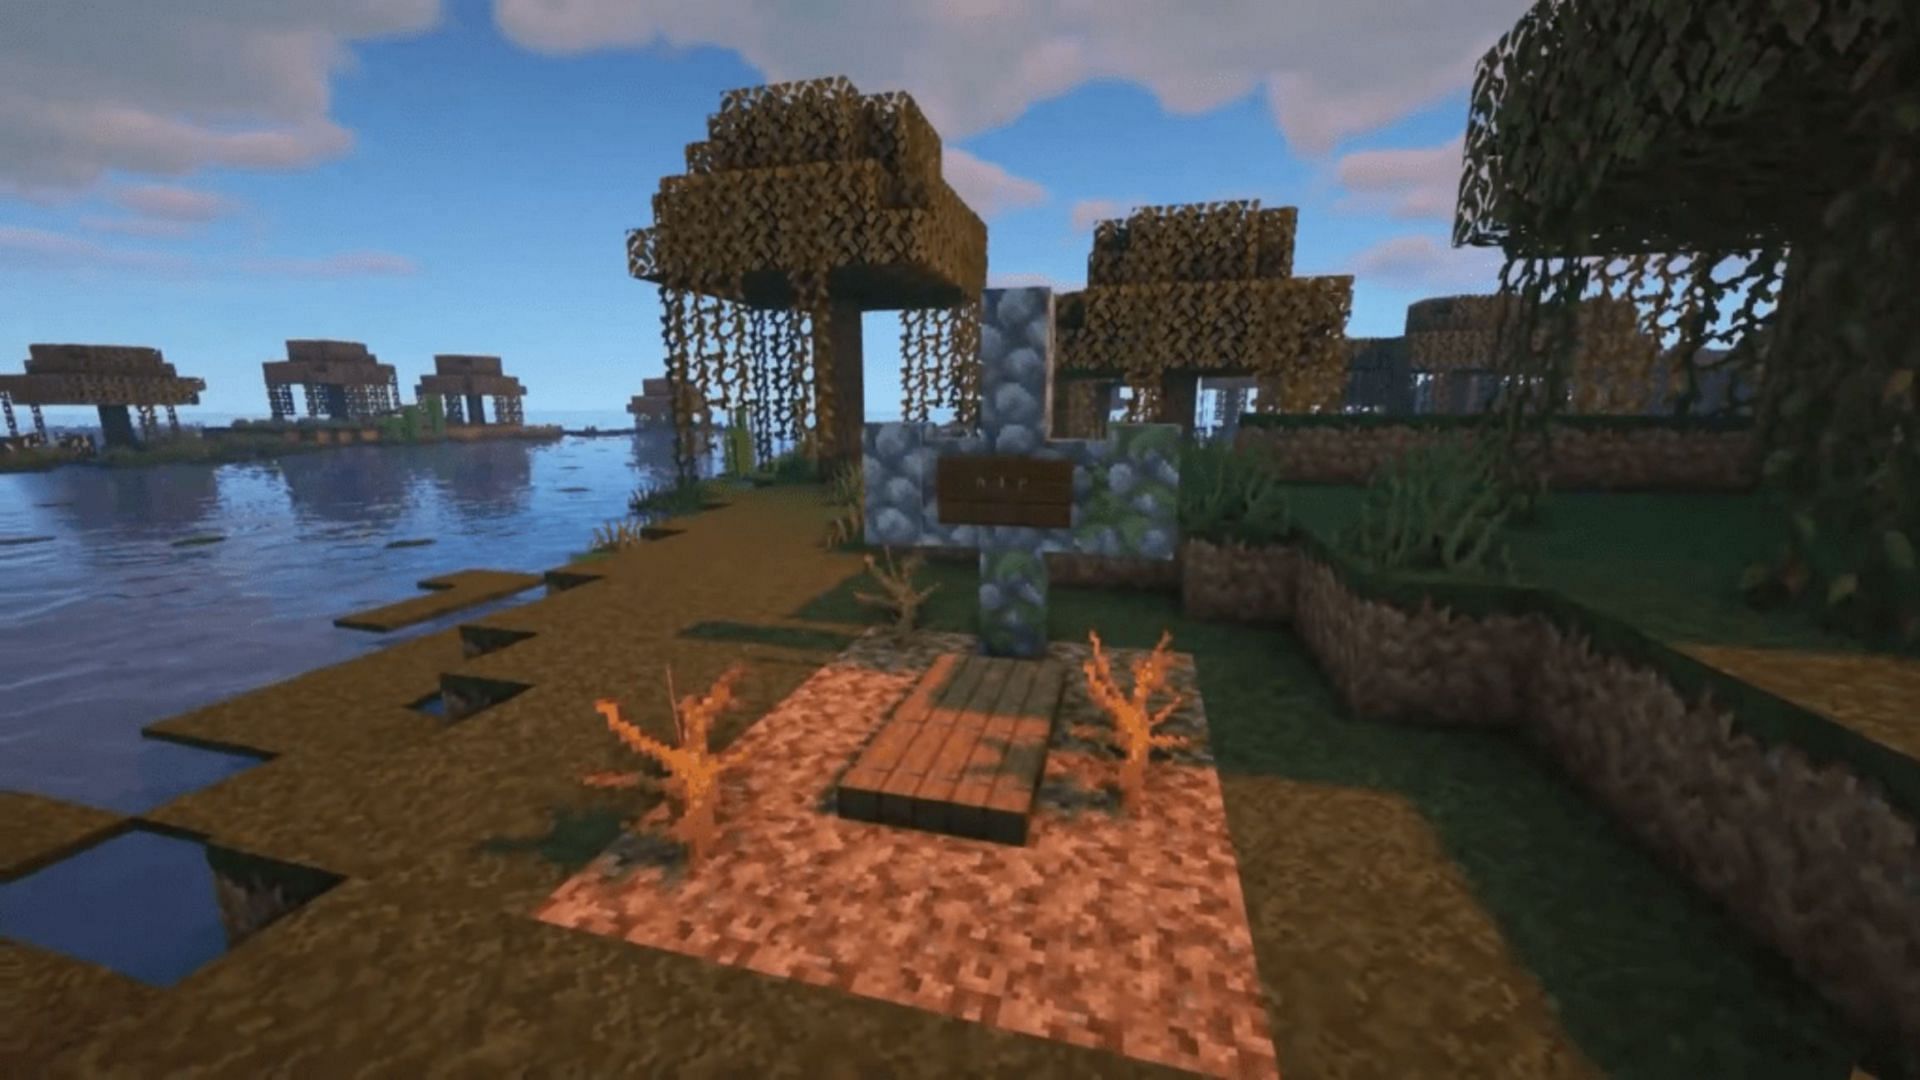 This creepy bed design can be placed almost anywhere in a Minecraft world (Image via Spudetti/YouTube)